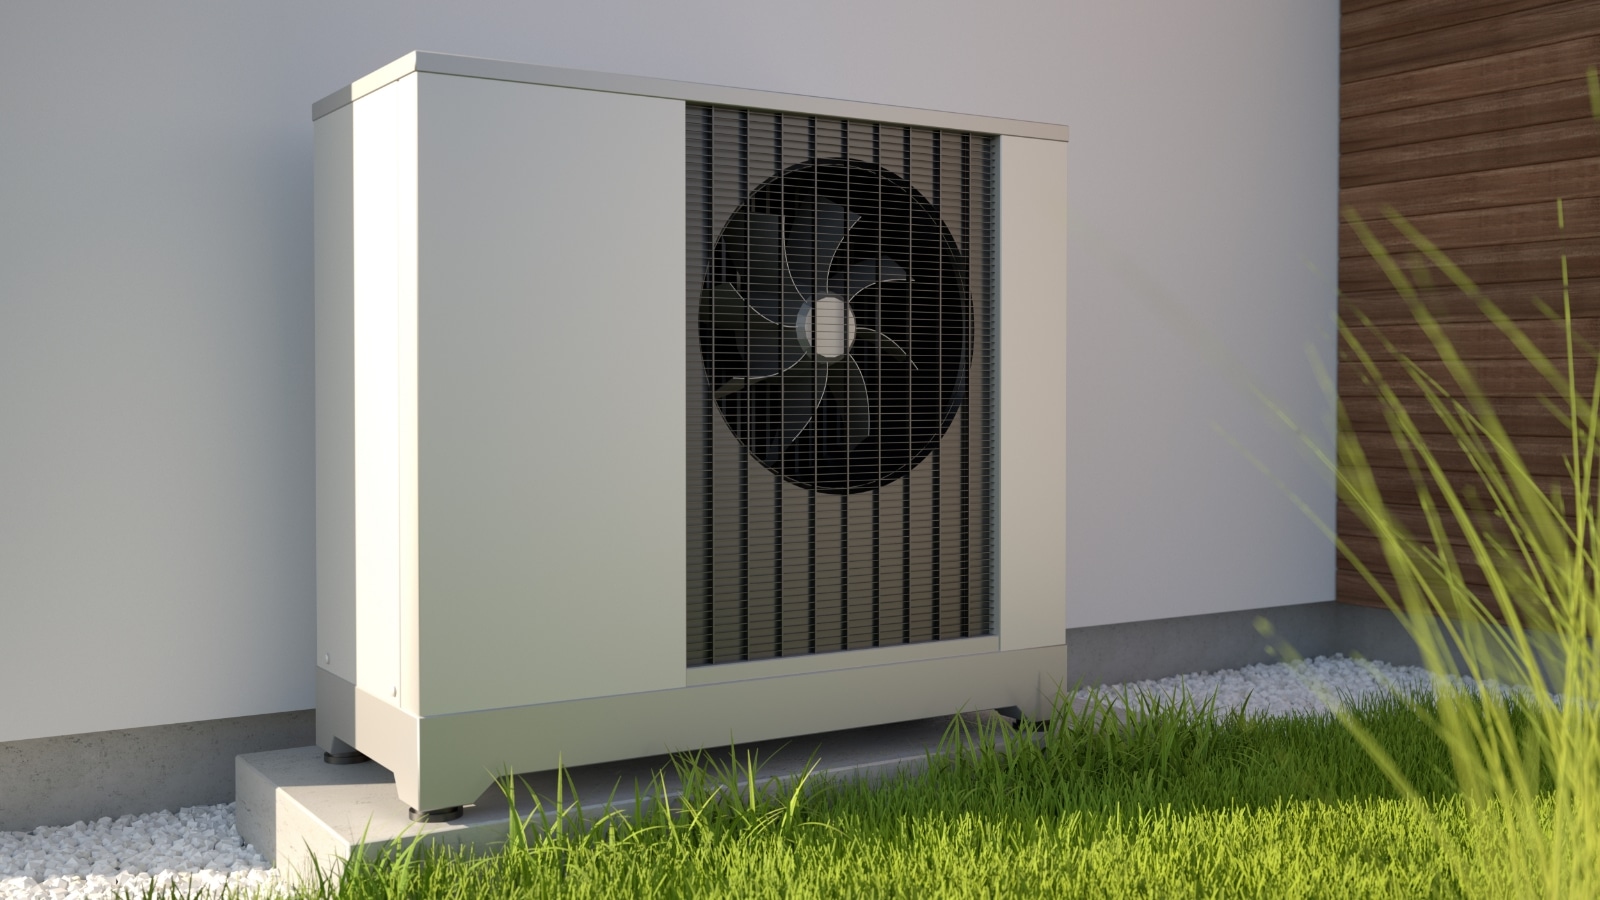 We2Sure – Bespoke insurance solutions for heat pumps